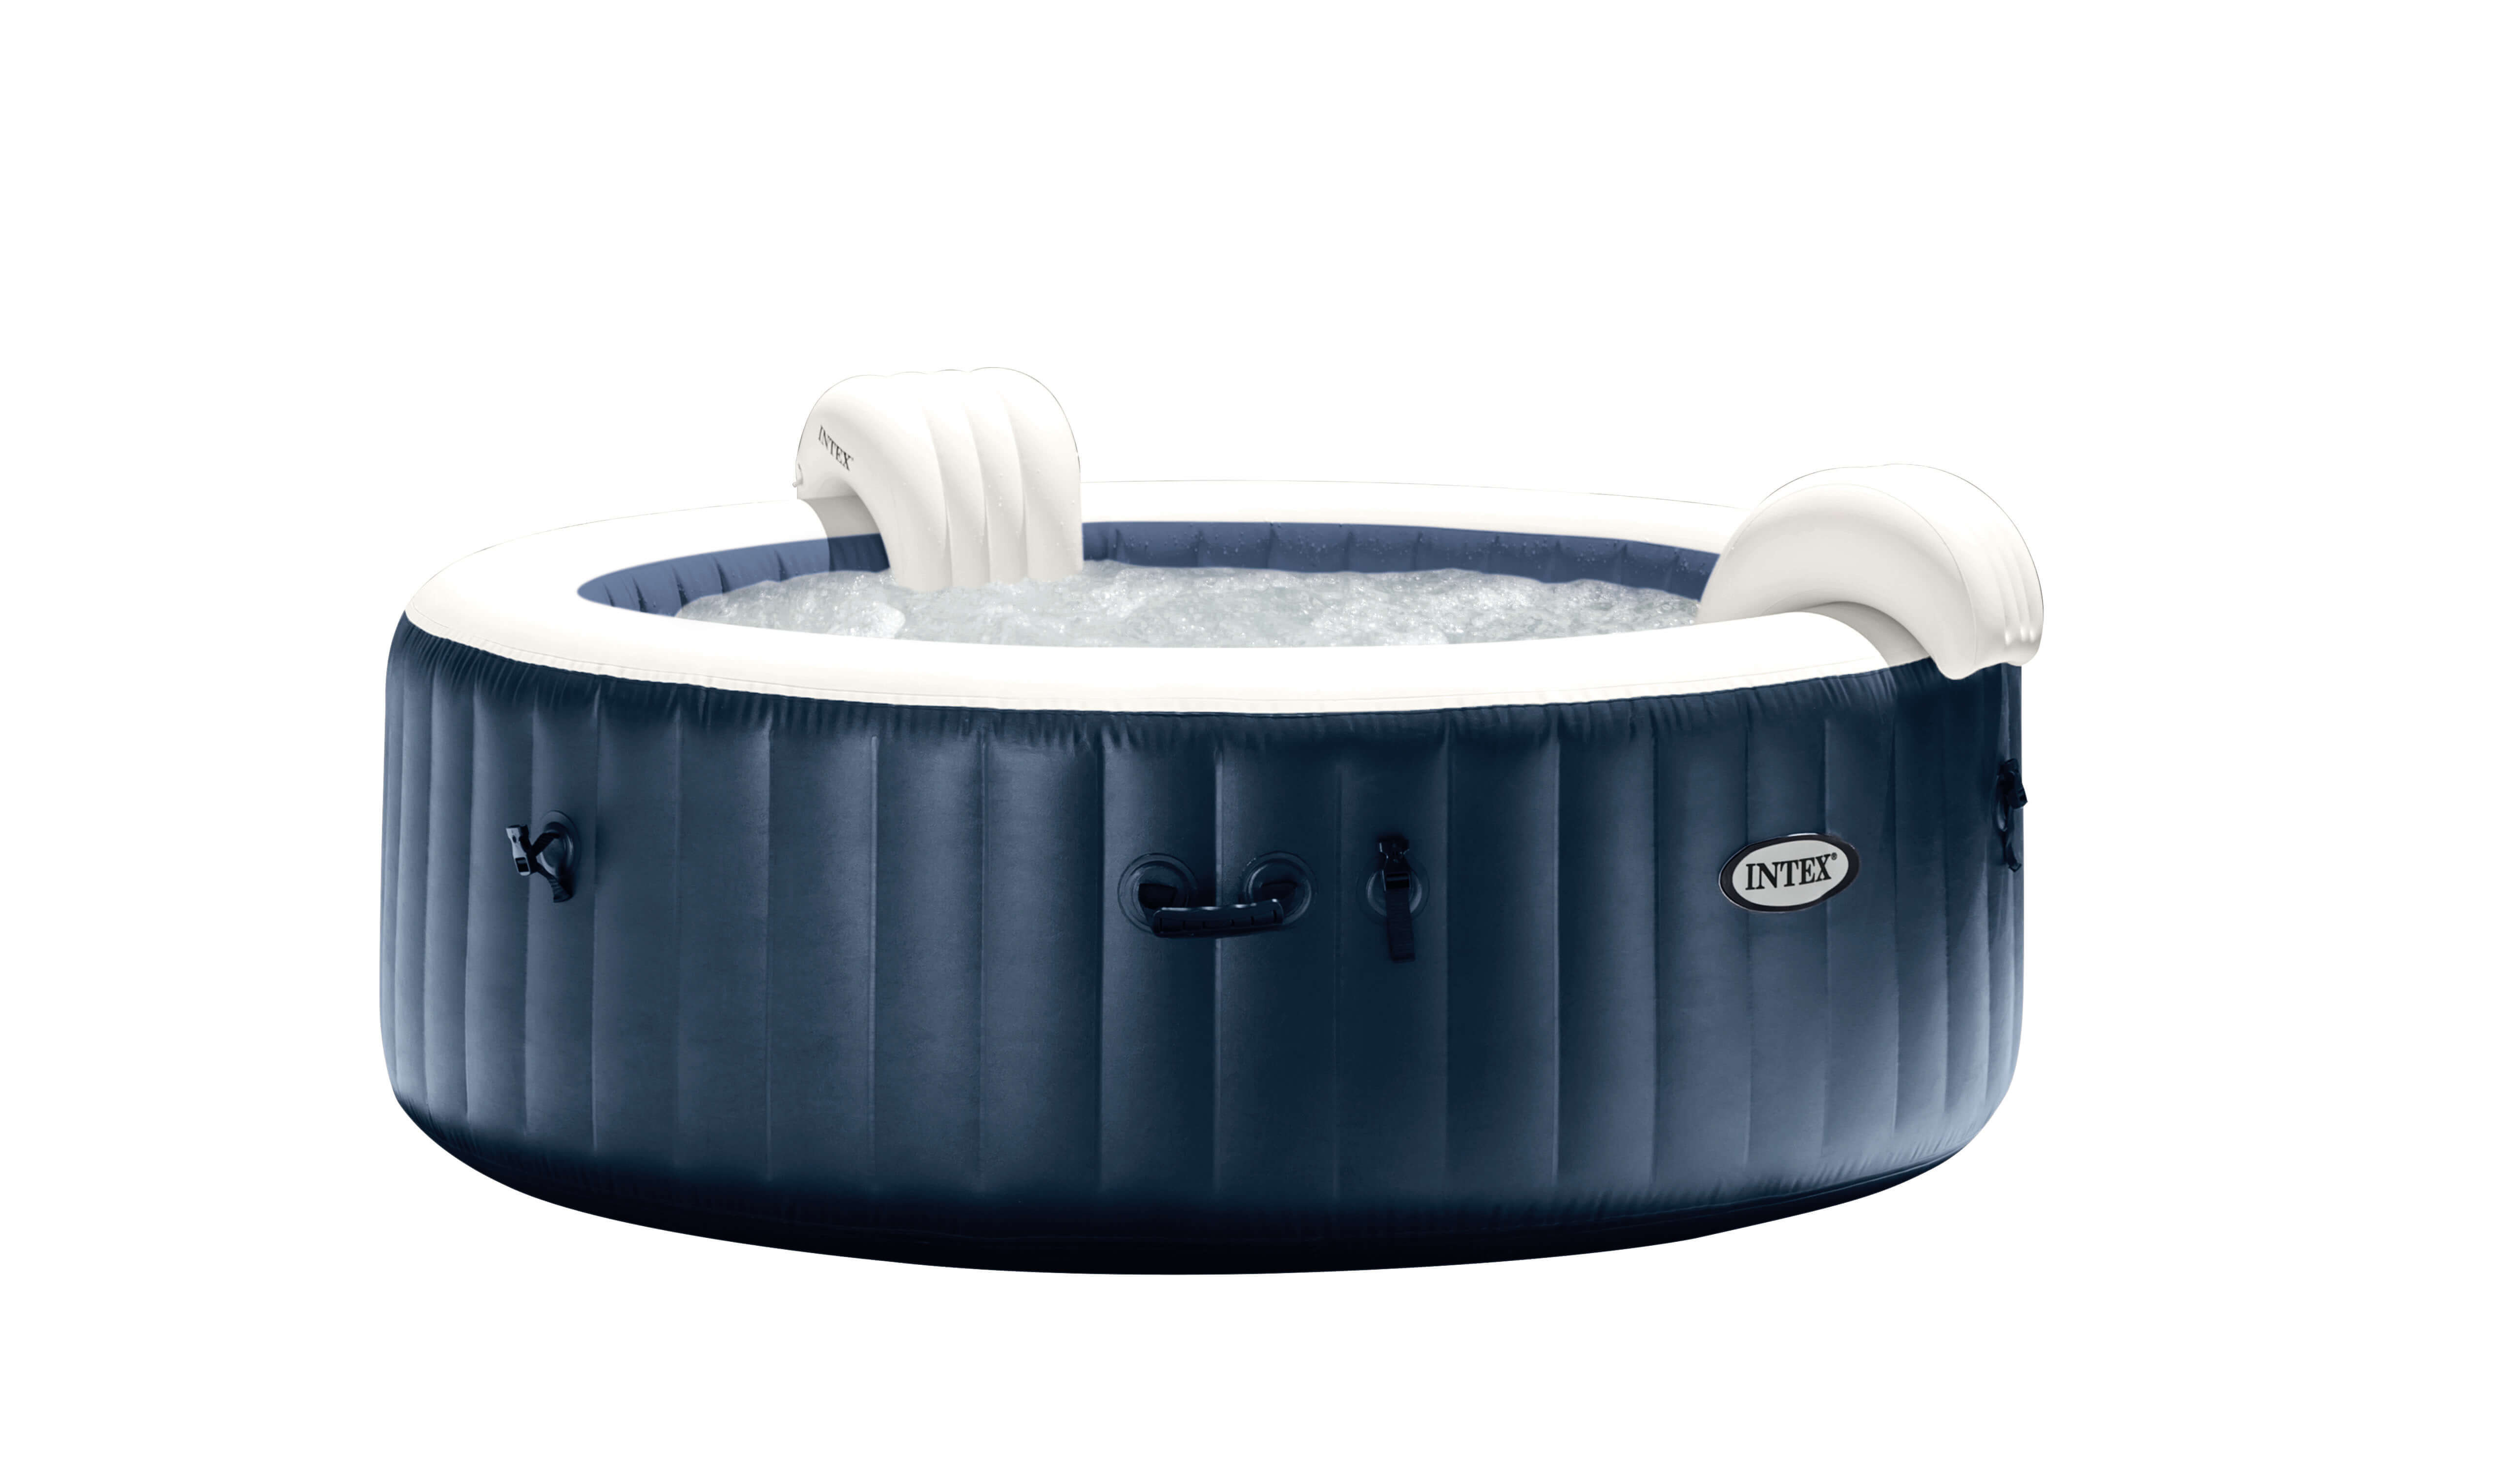 Pure Spa Gonflable Rond A Bulle Led 6 Places 216 X 71 Cm Intex Oogarden